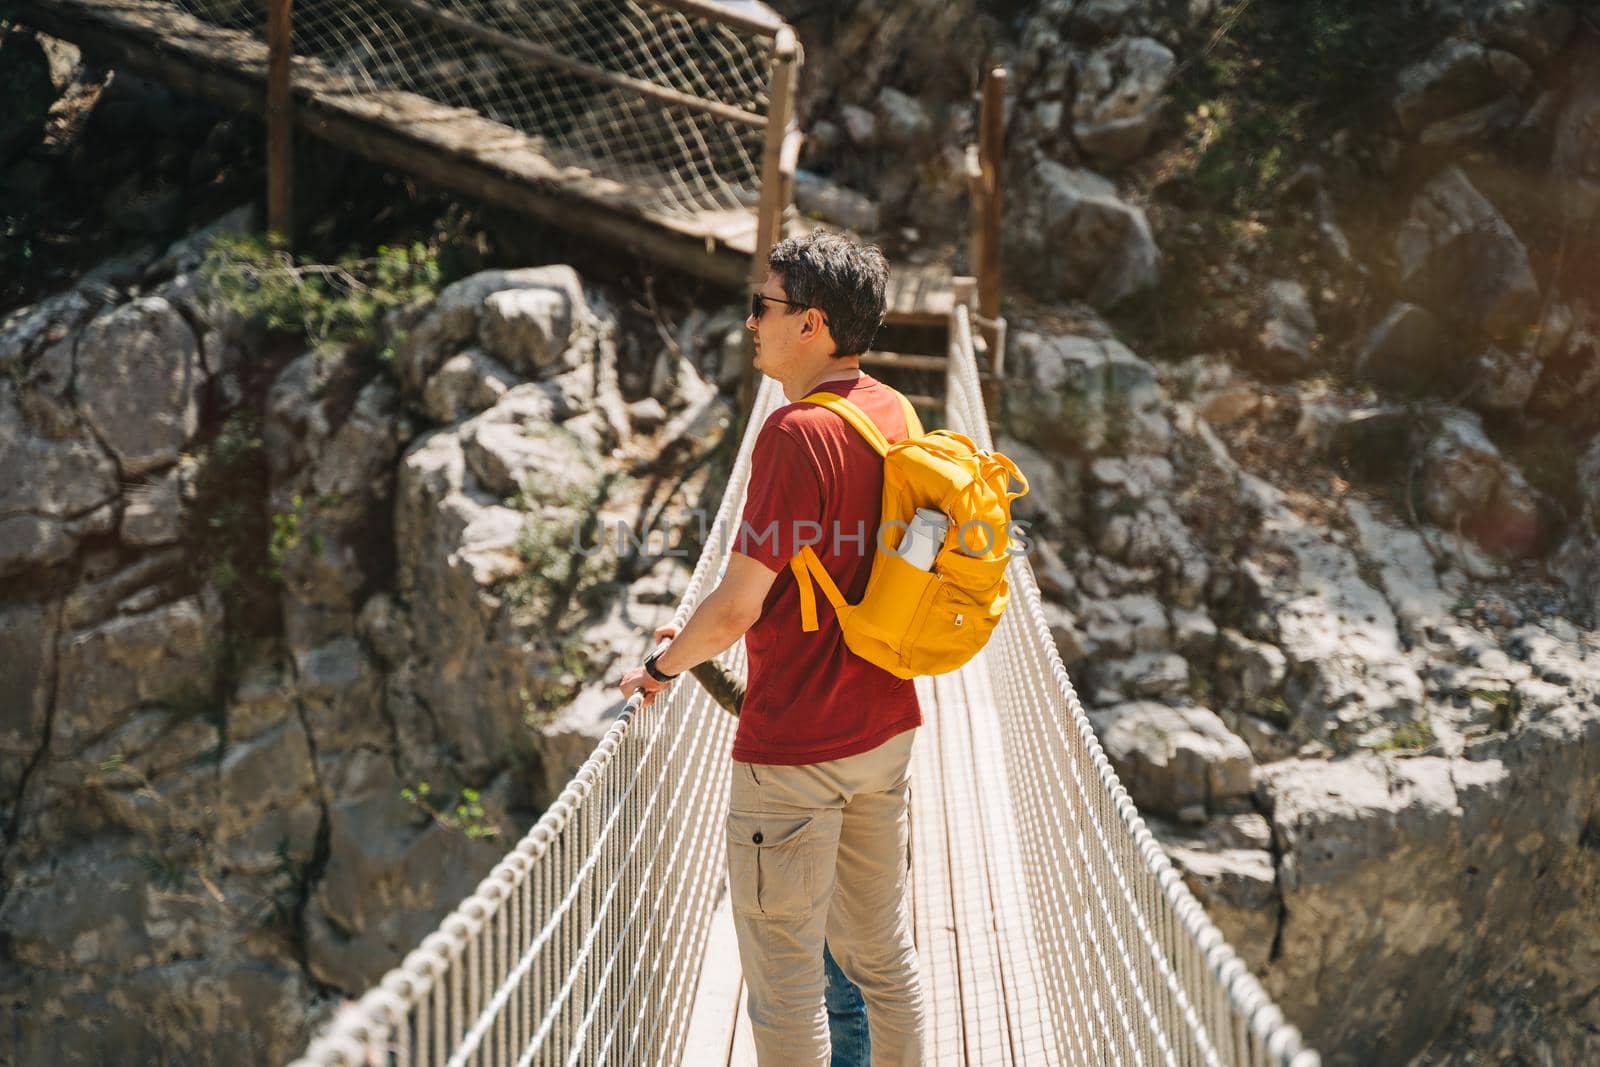 Father and son looking afar from the rope bridge in the mountains when hiking. Casually dressed tourists child school boy and his dad with yellow backpack crossing the canyon through rope bridge.